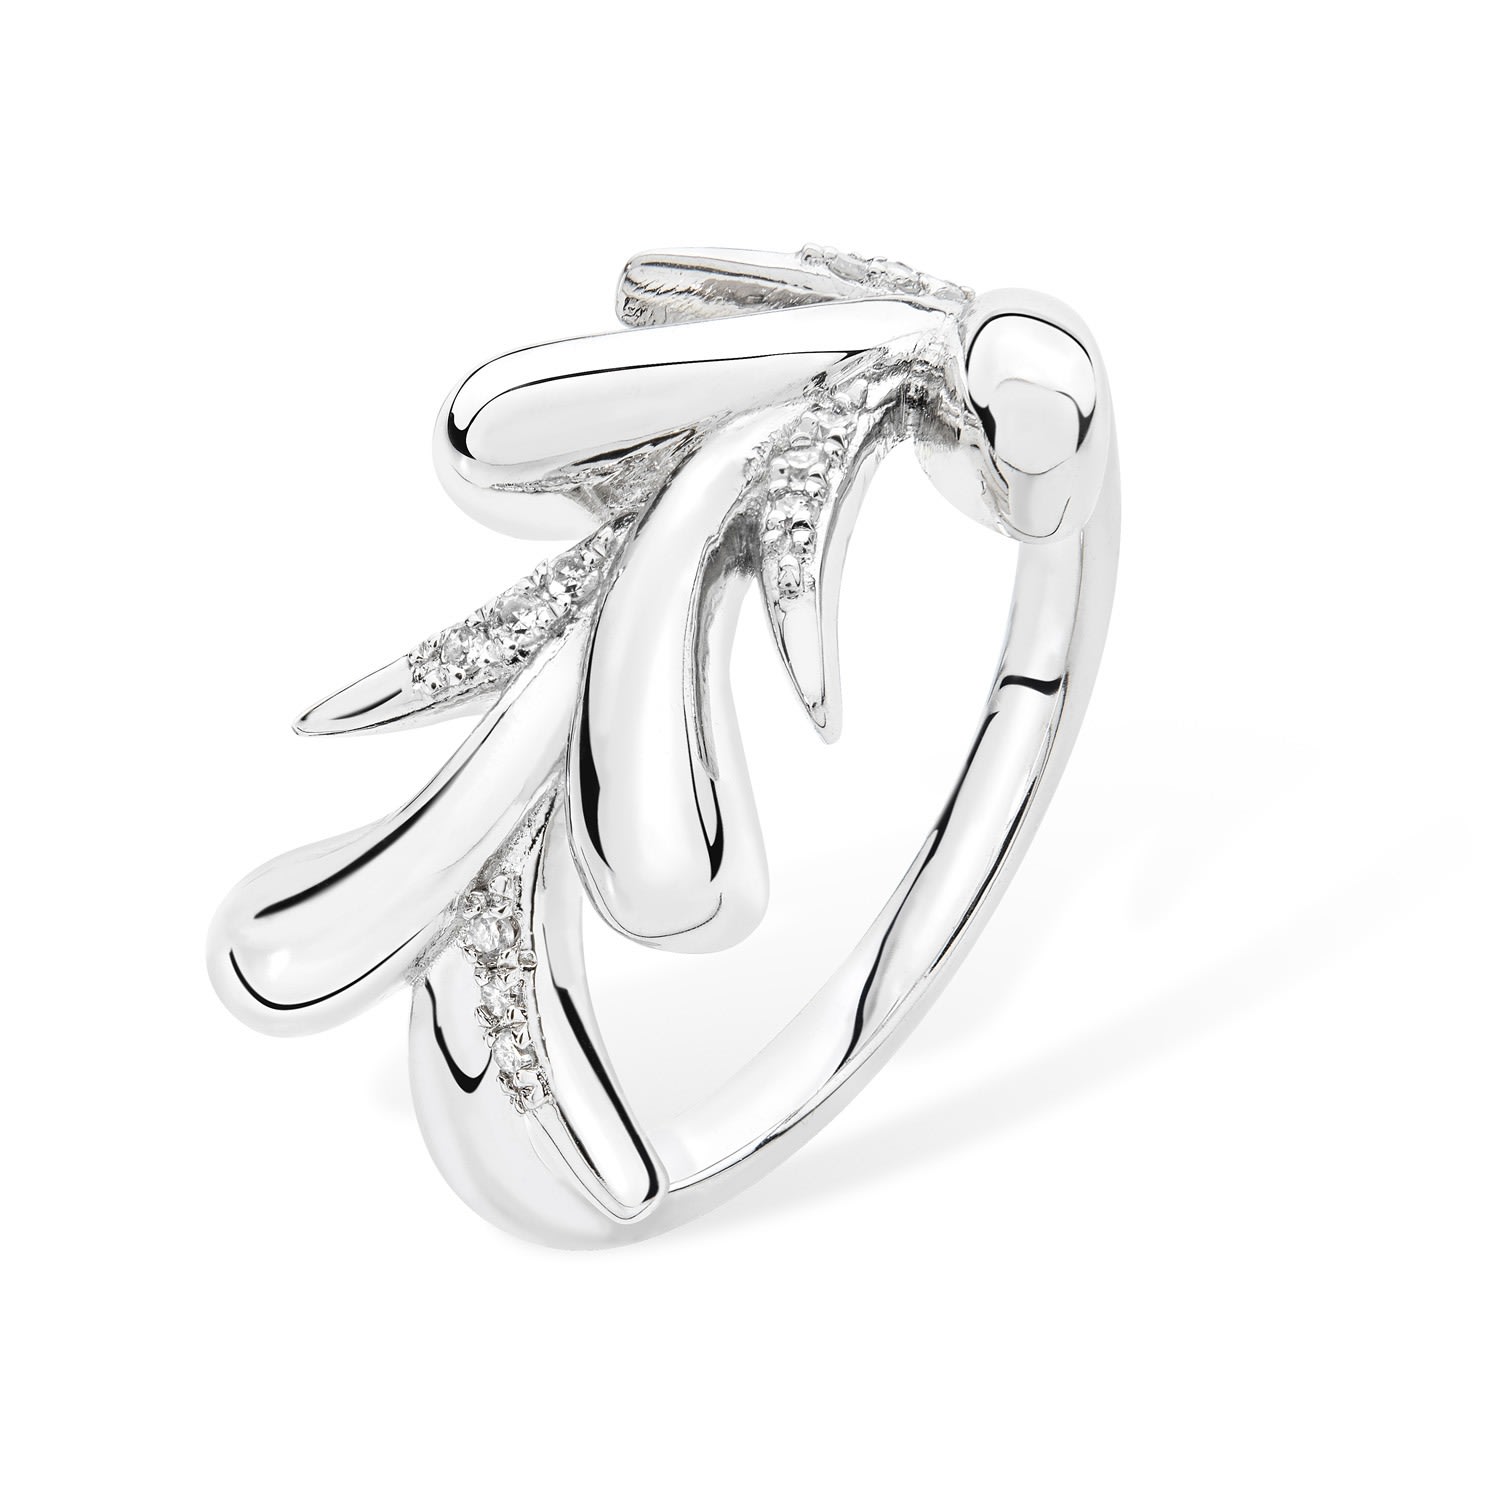 Lucy Quartermaine Women's Silver Sycamore Kiss Ring In Metallic